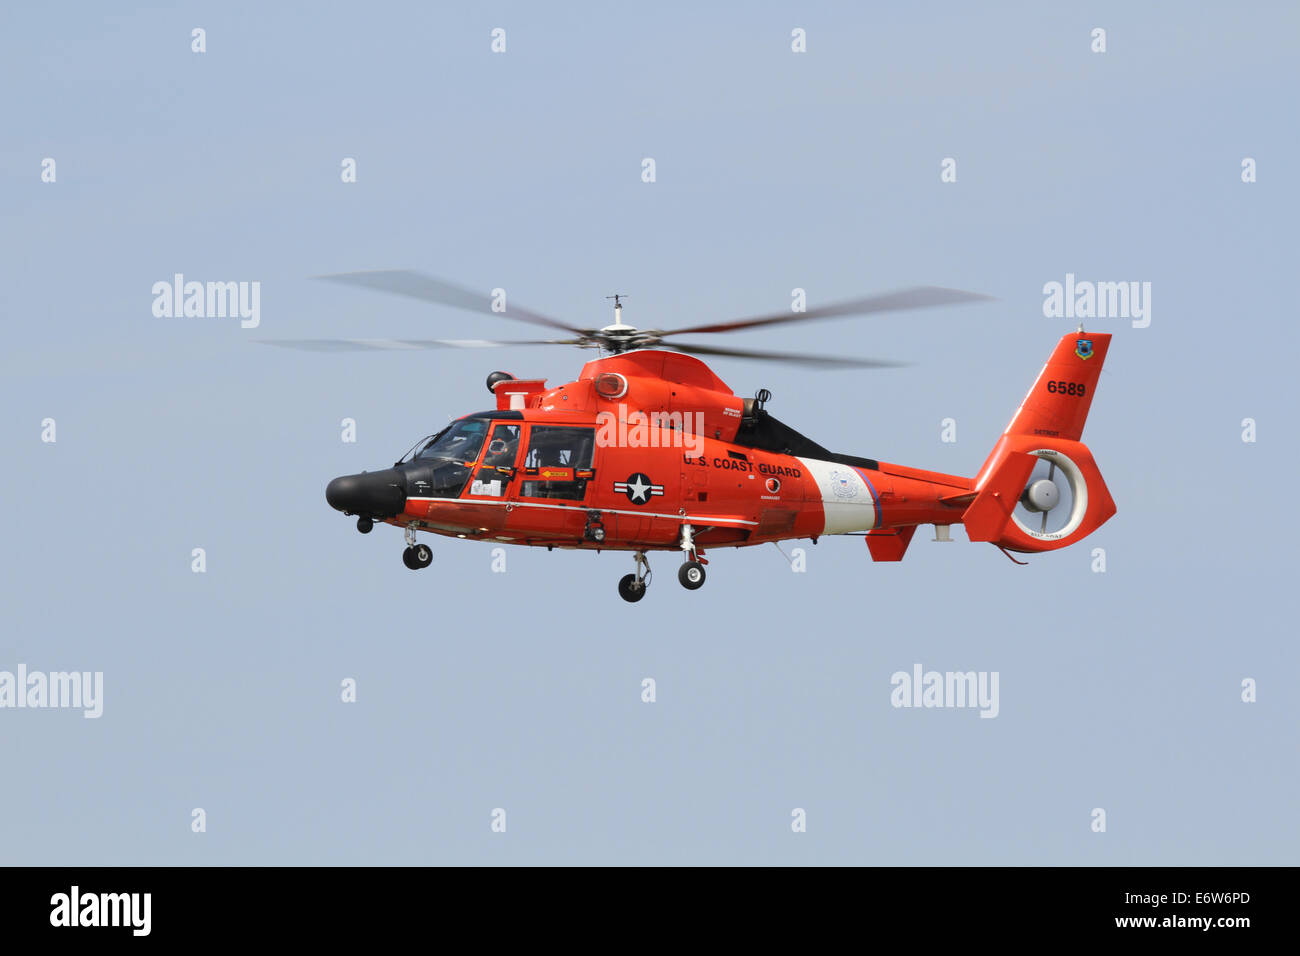 CLEVELAND, OHIO - August, 30: US Coast Guard Dolphin Helicopter, on August, 30 2014 at The Cleveland National Airshow Stock Photo